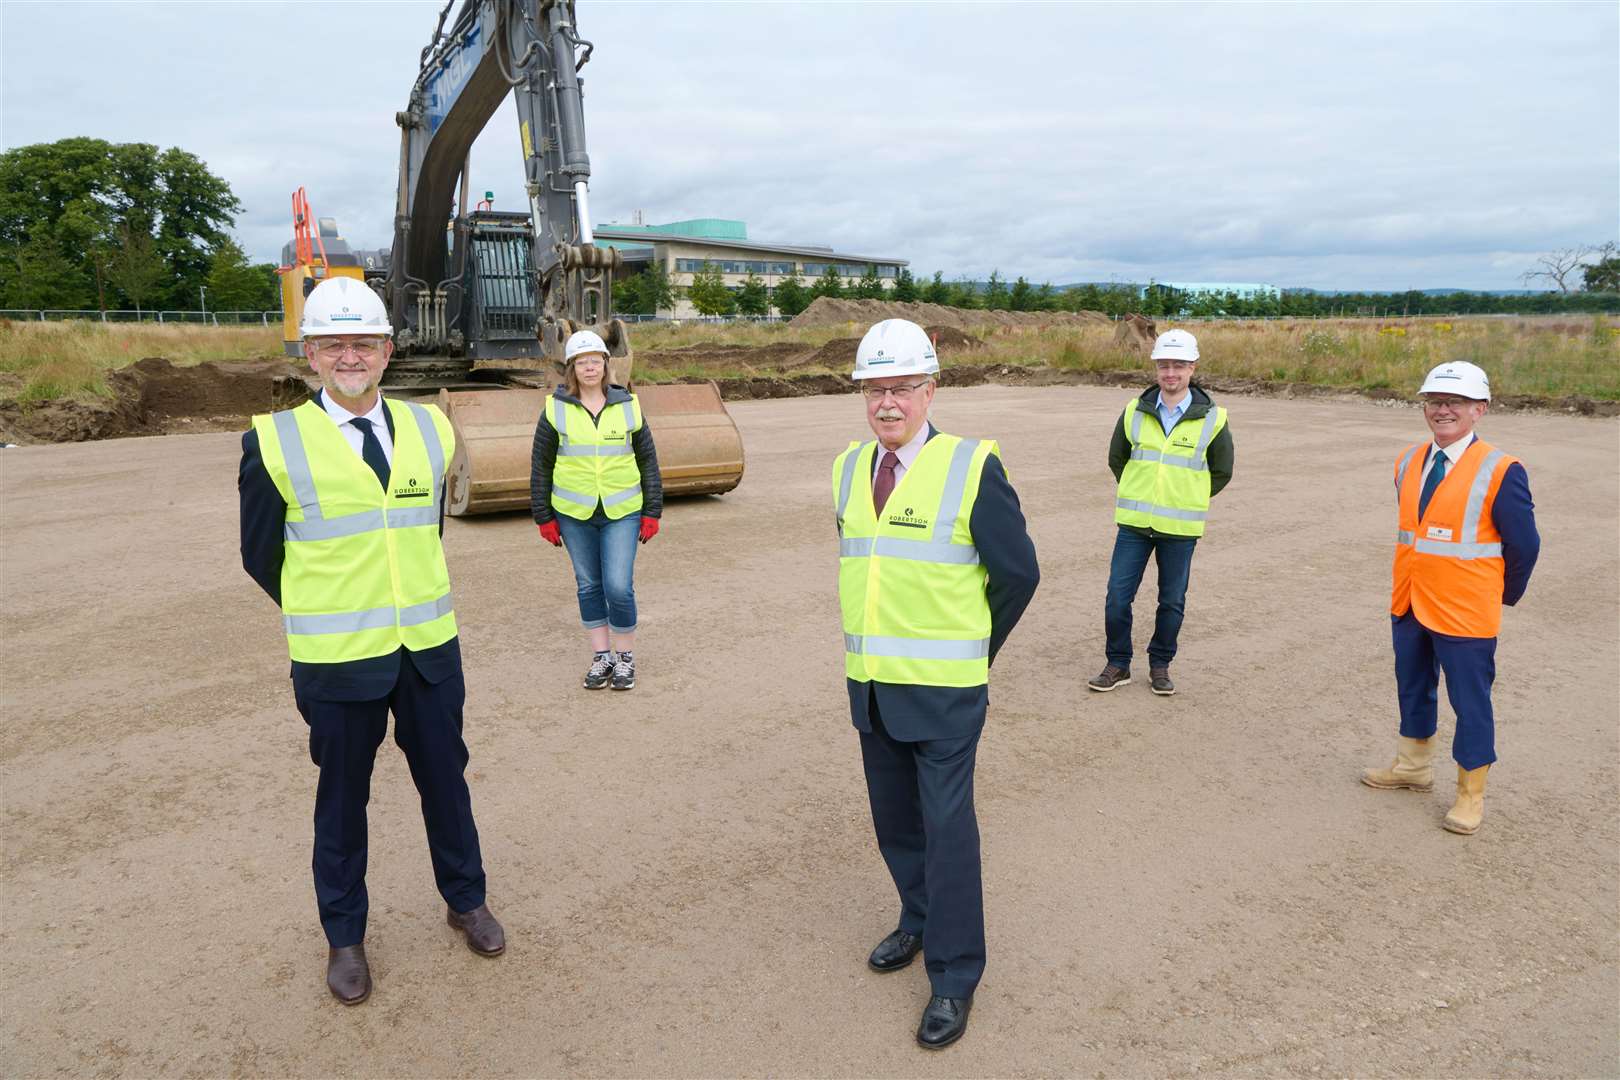 Pictured at the turf cutting ceremony at the Life Sciences Campus site in Inverness are (from left) Professor Todd Walker, life sciences PhD student Ronie Walters, HIE chairman Alasdair Dodds CBE, life sciences PhD student Manuel Valdivia, and Frank Reid, regional managing director, Robertson Construction Northern.